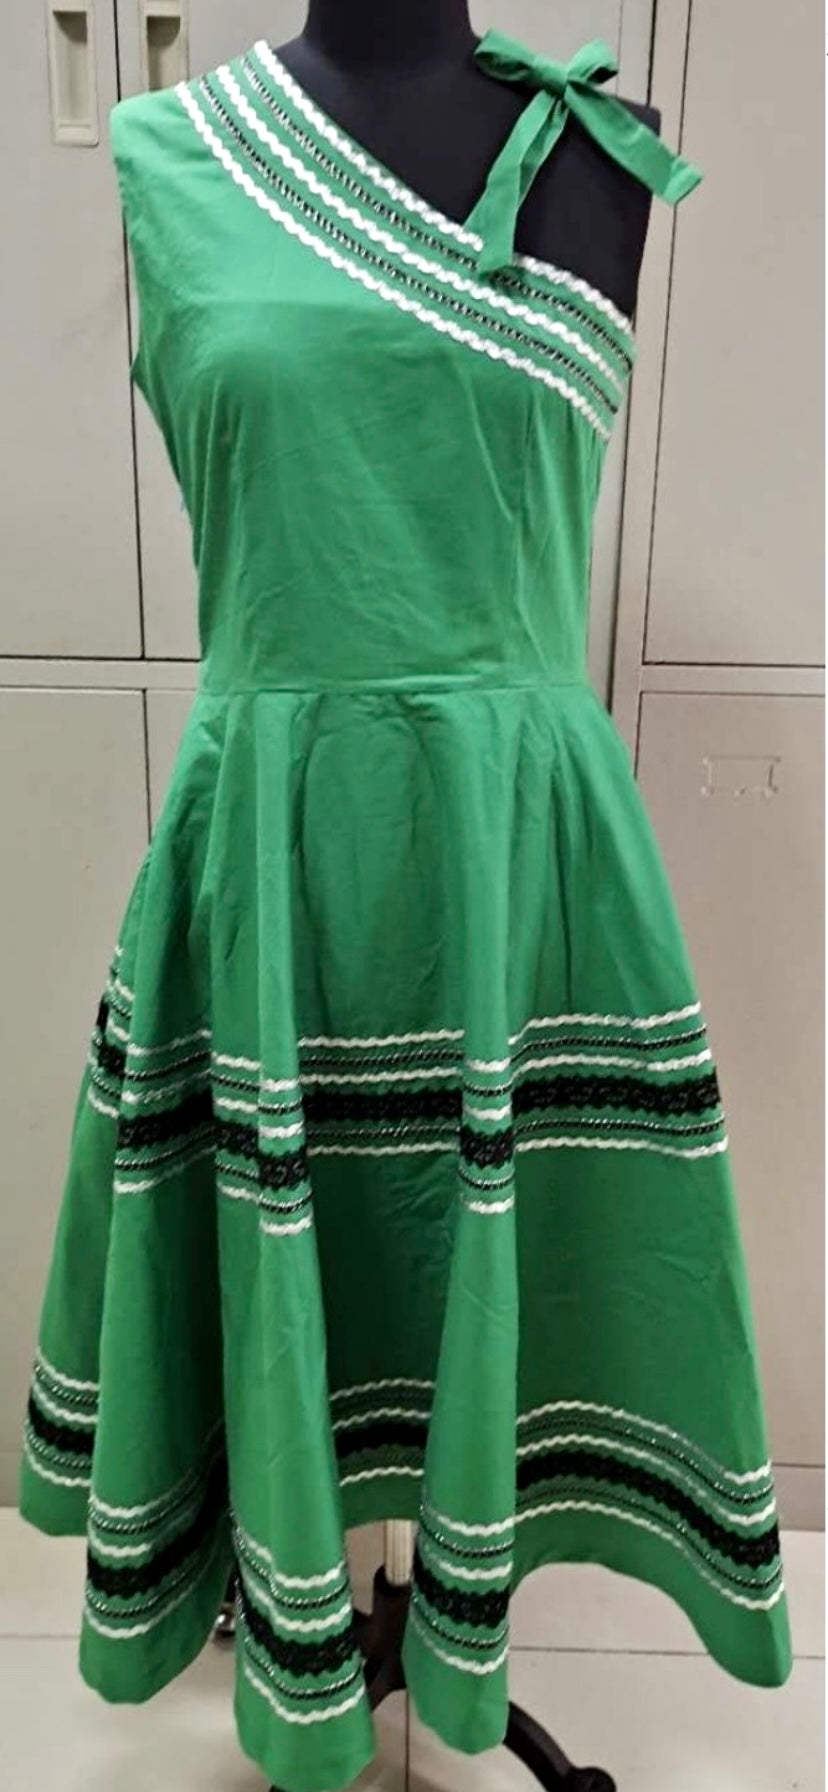 Patio dress vintage 1950s style one shoulder Mexican full circle dress in green